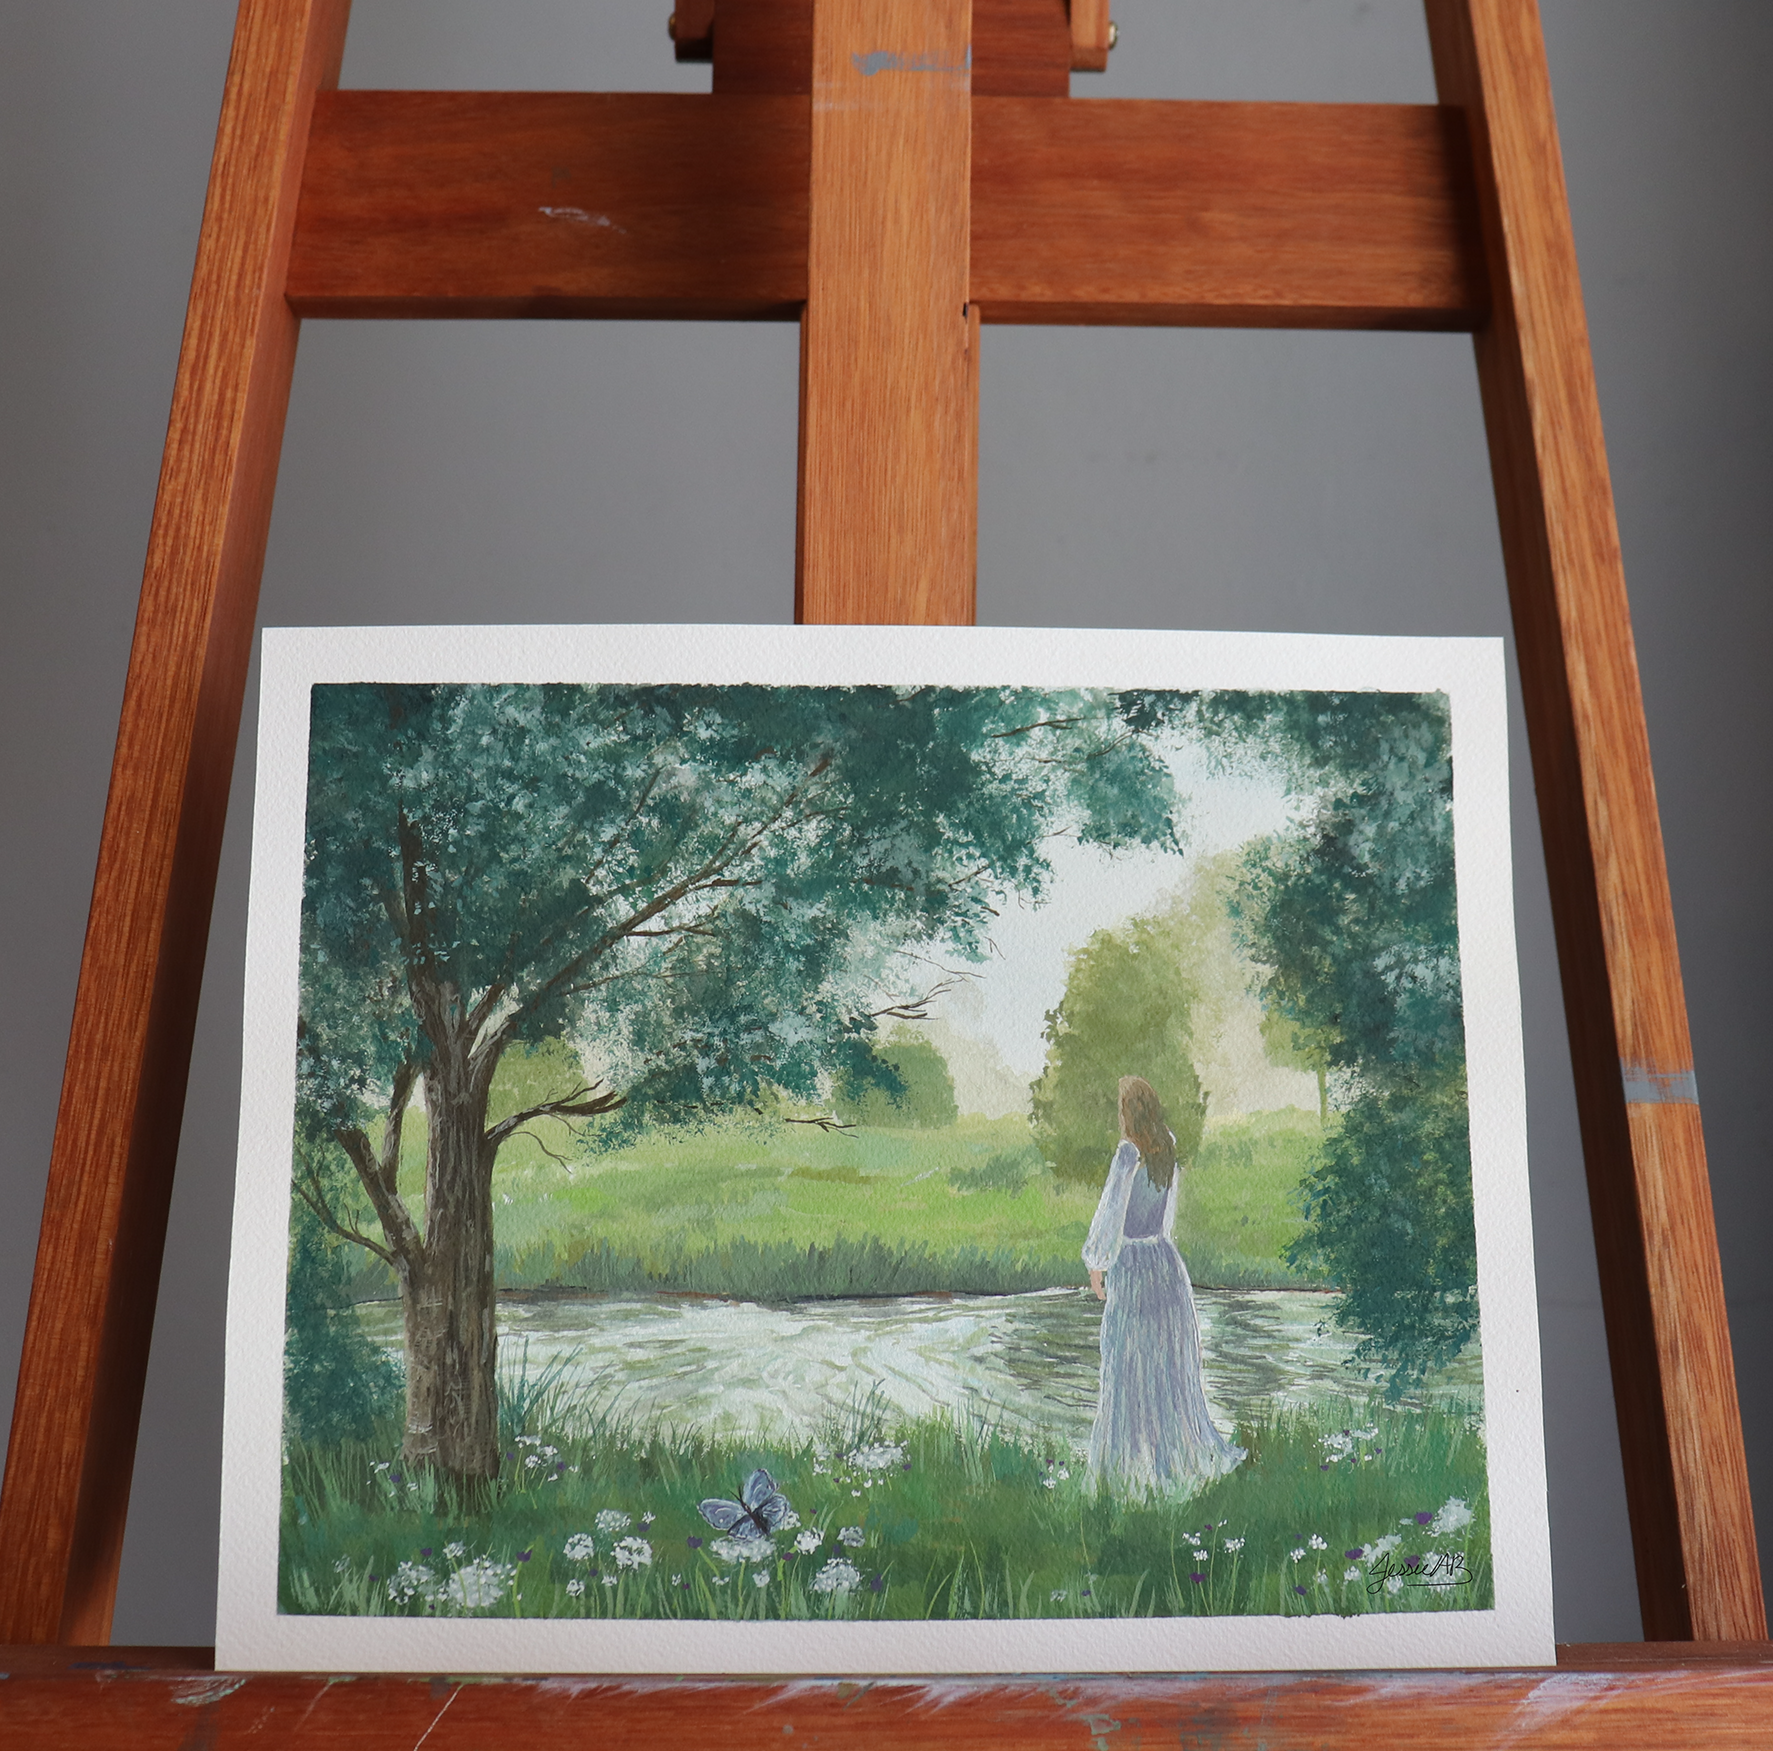 Original painting on my easel named "Rumination" in natural lighting